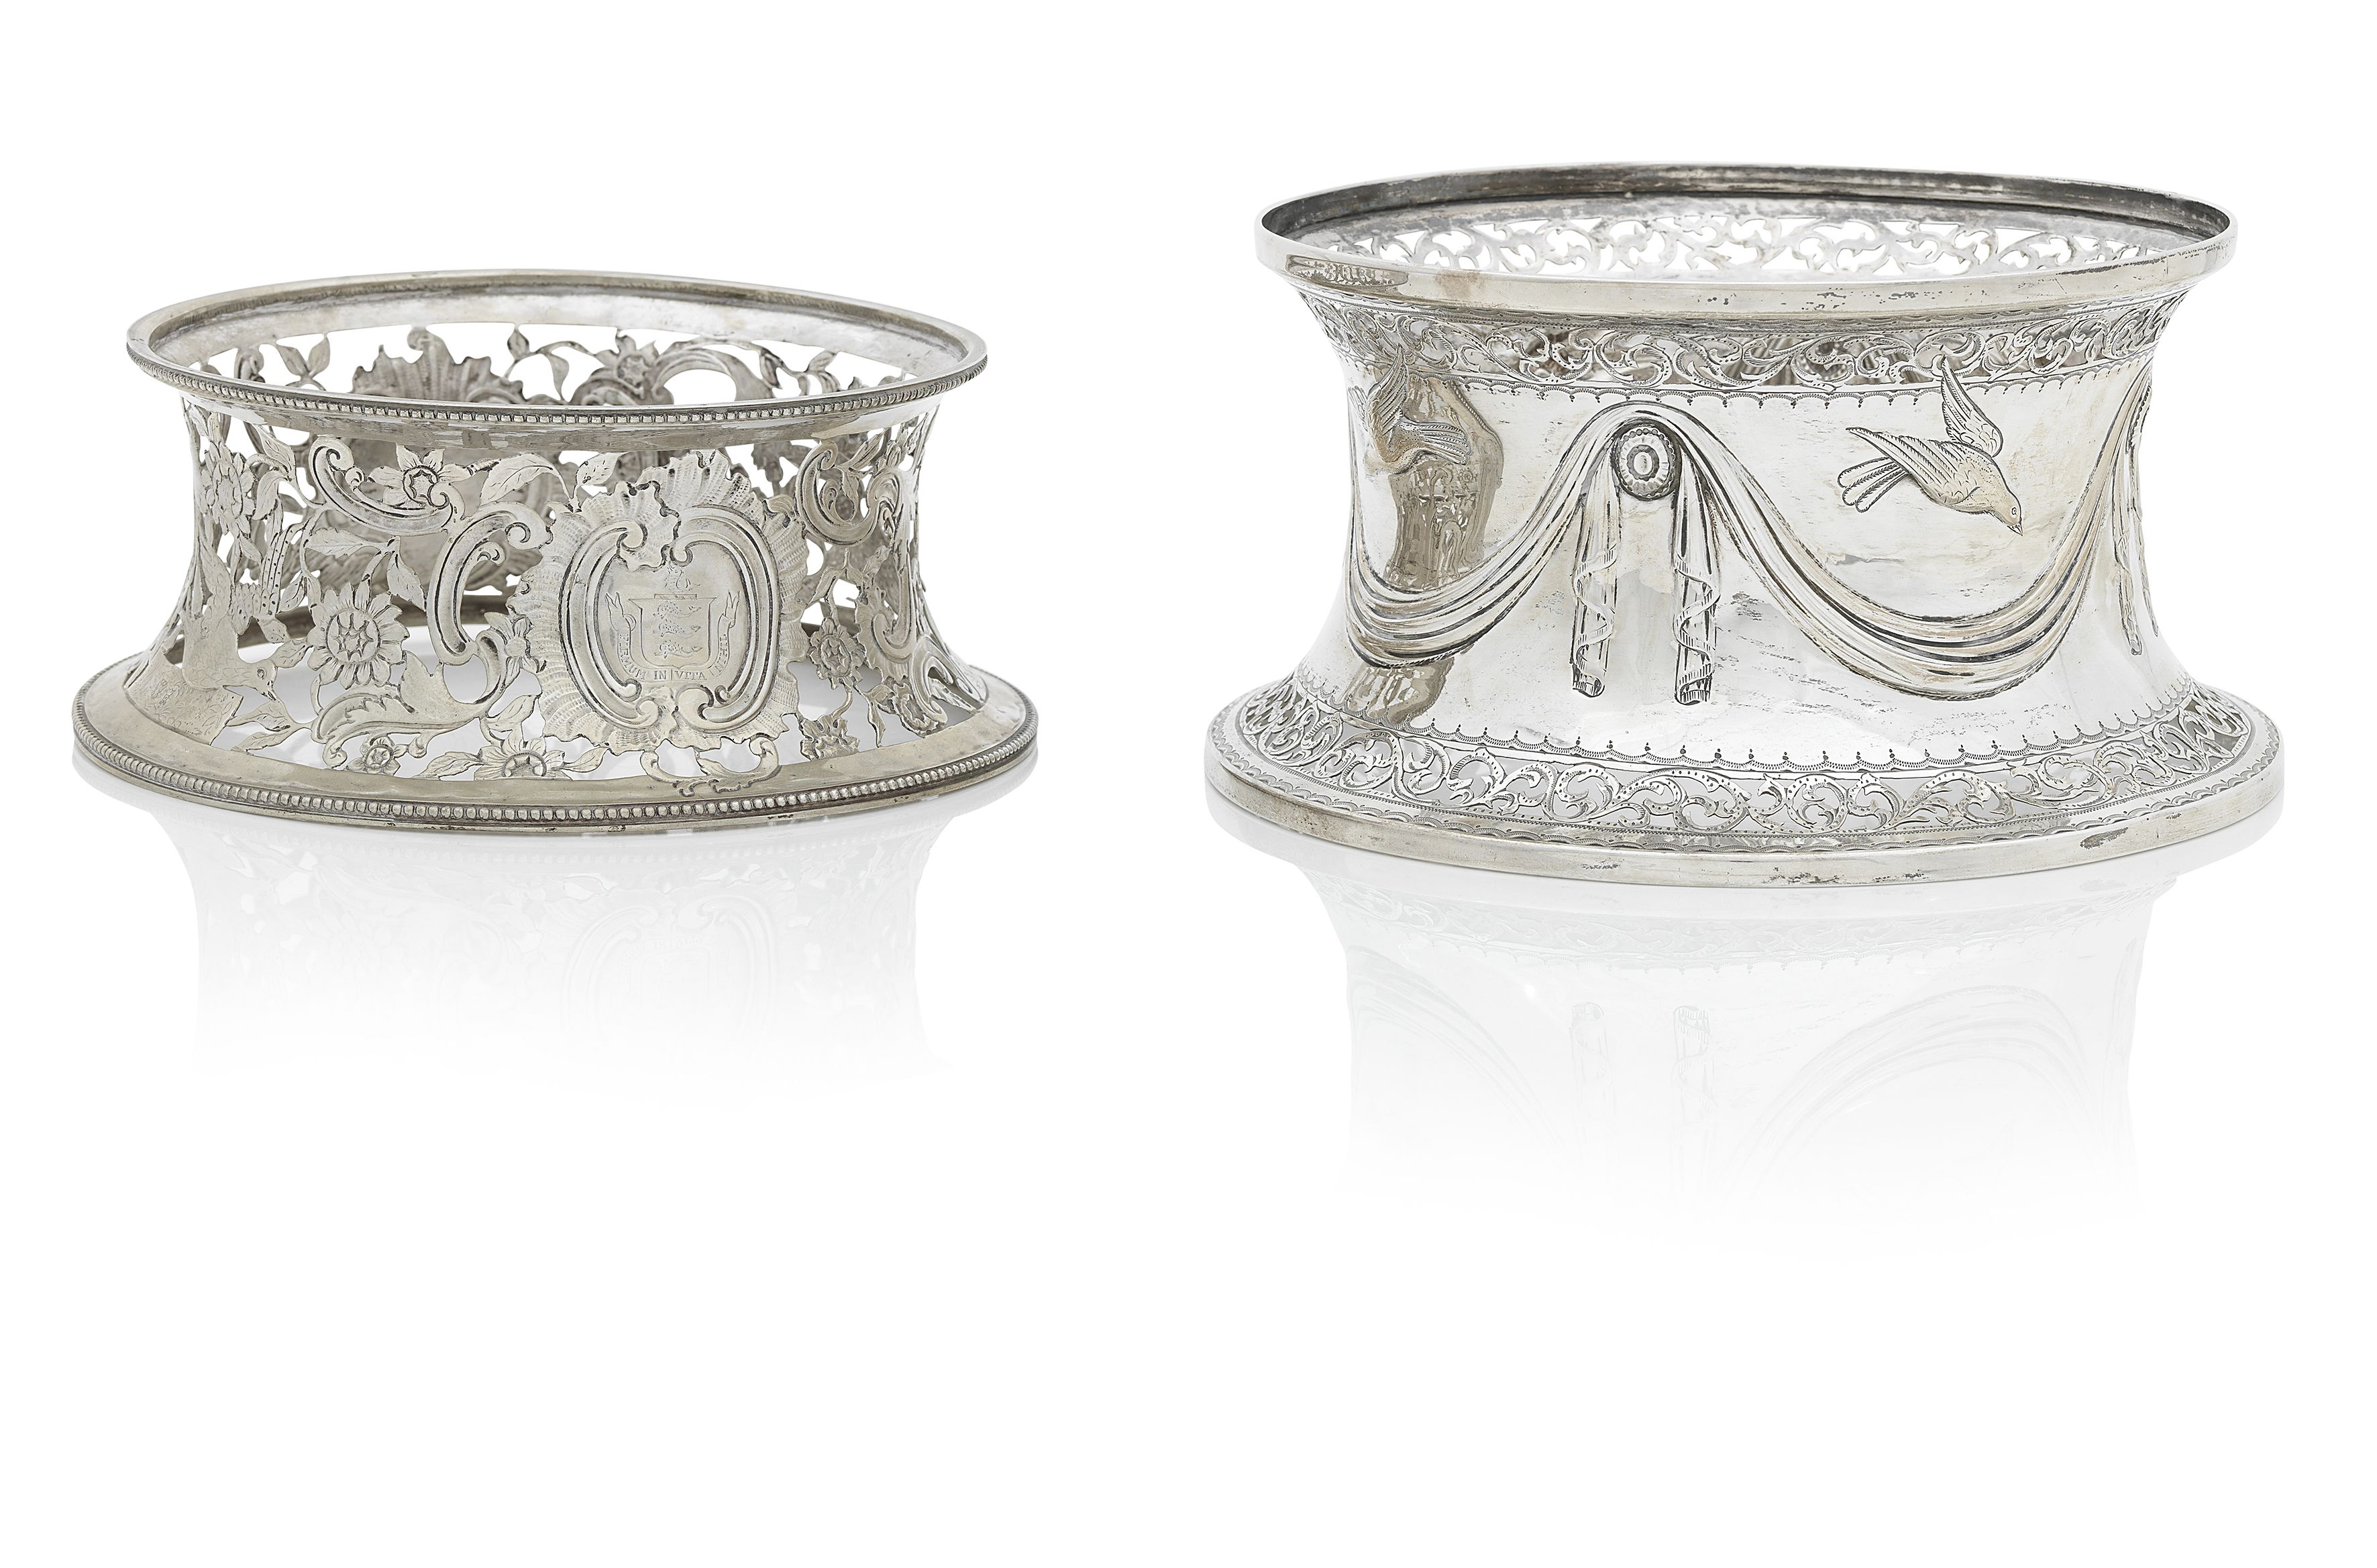 Two Silver Dish Rings 19th/20th Century (2)